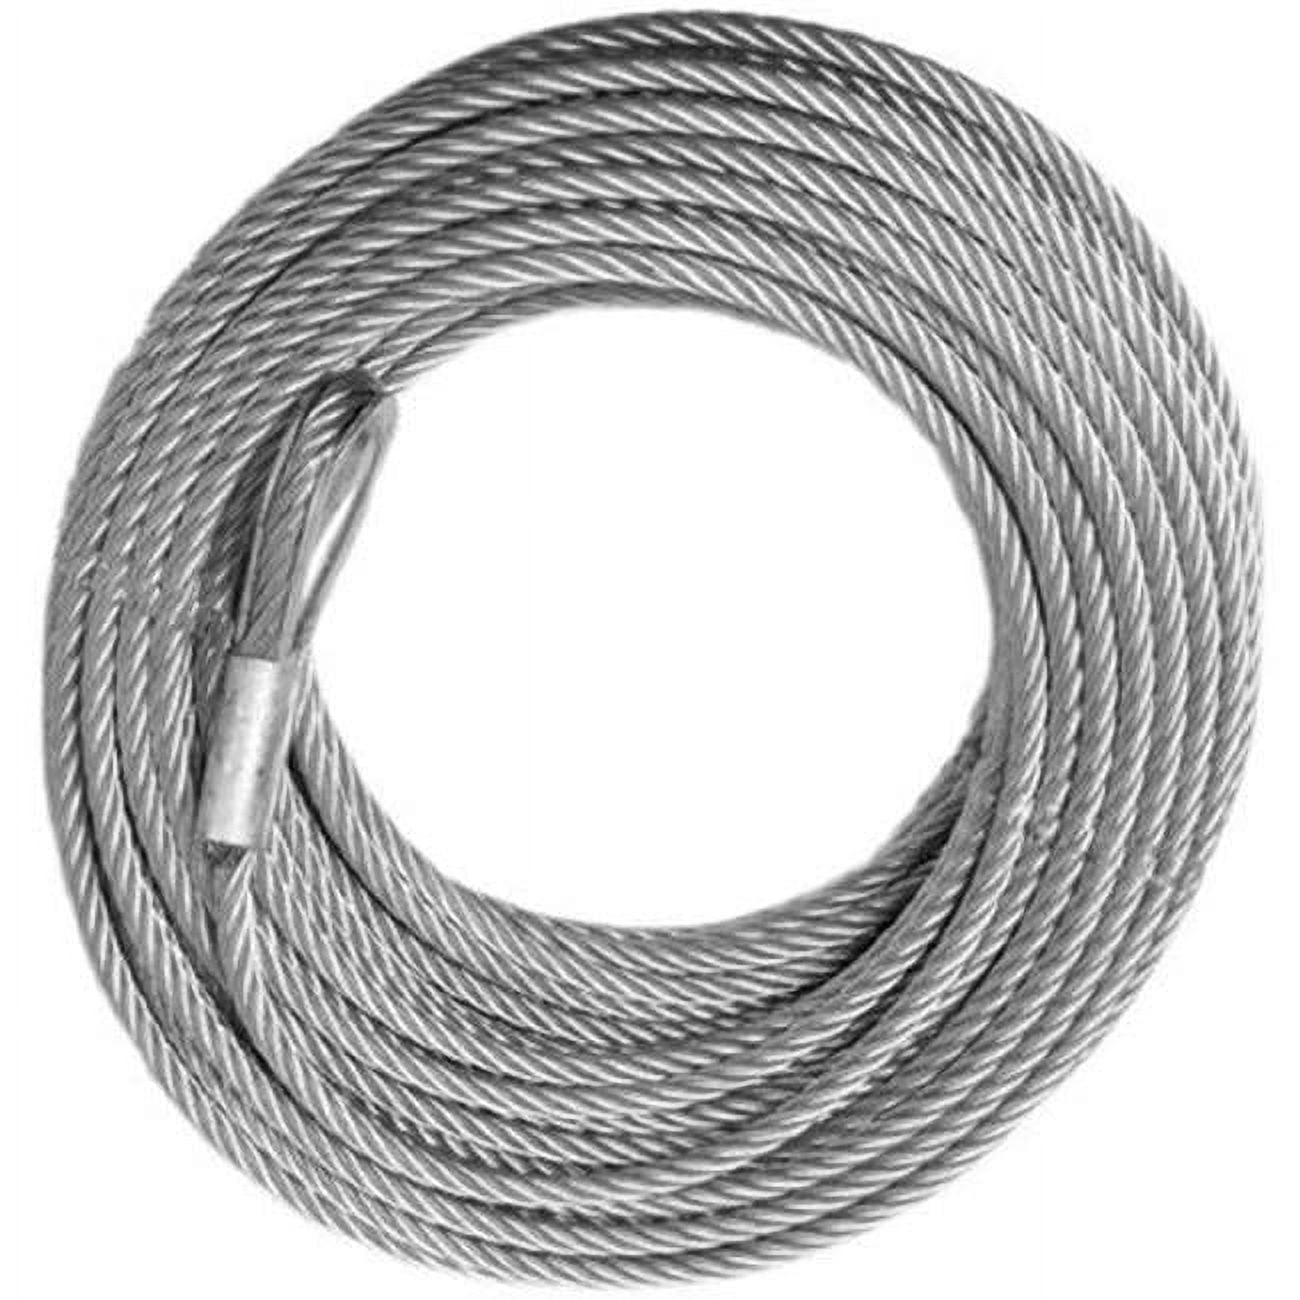 Wrecker Replacement Cable - 7/16 X 100 Galvanized (17 600lb Strength) (vehicle Recovery)